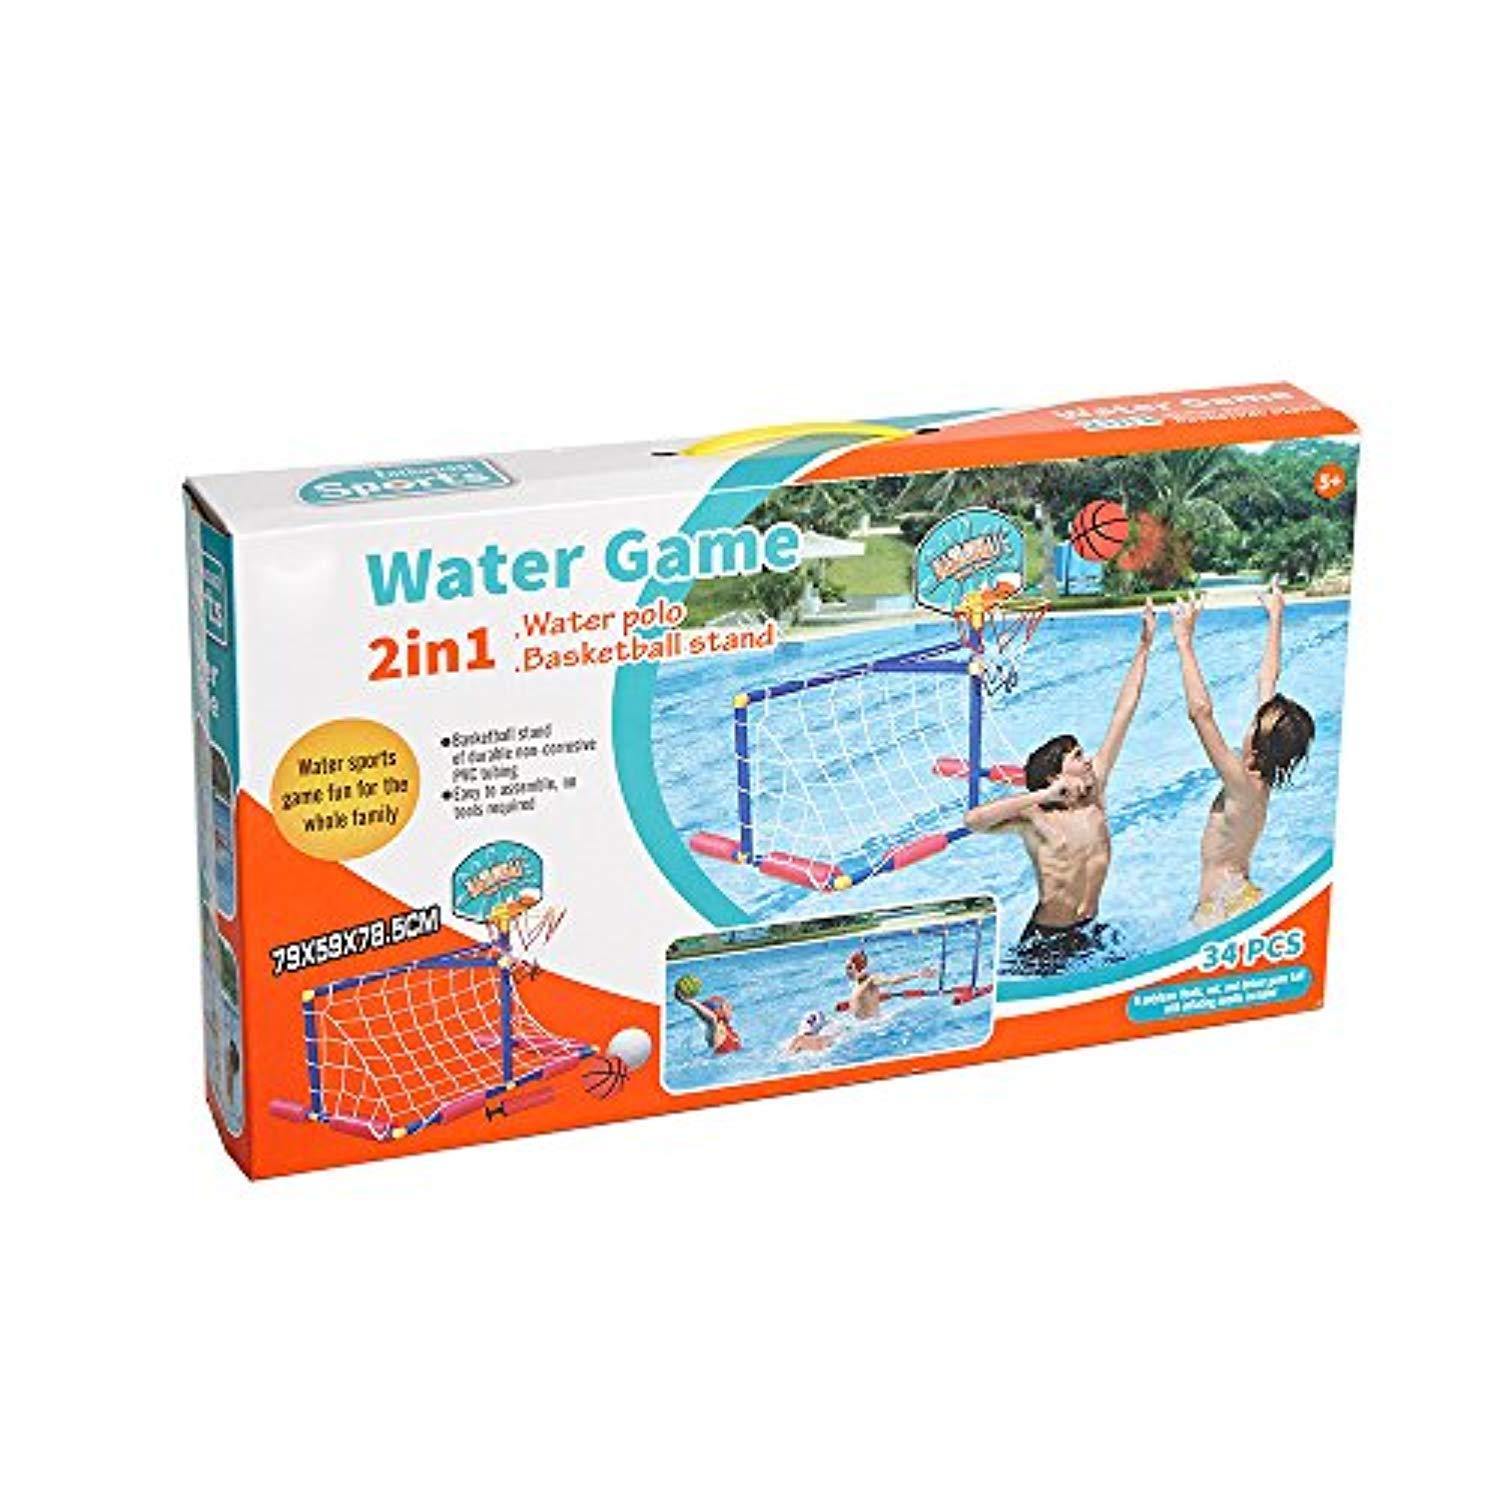 Bosonshop 2 in 1 Water Sport Game ,Water Polo with Basketball Stand for Play